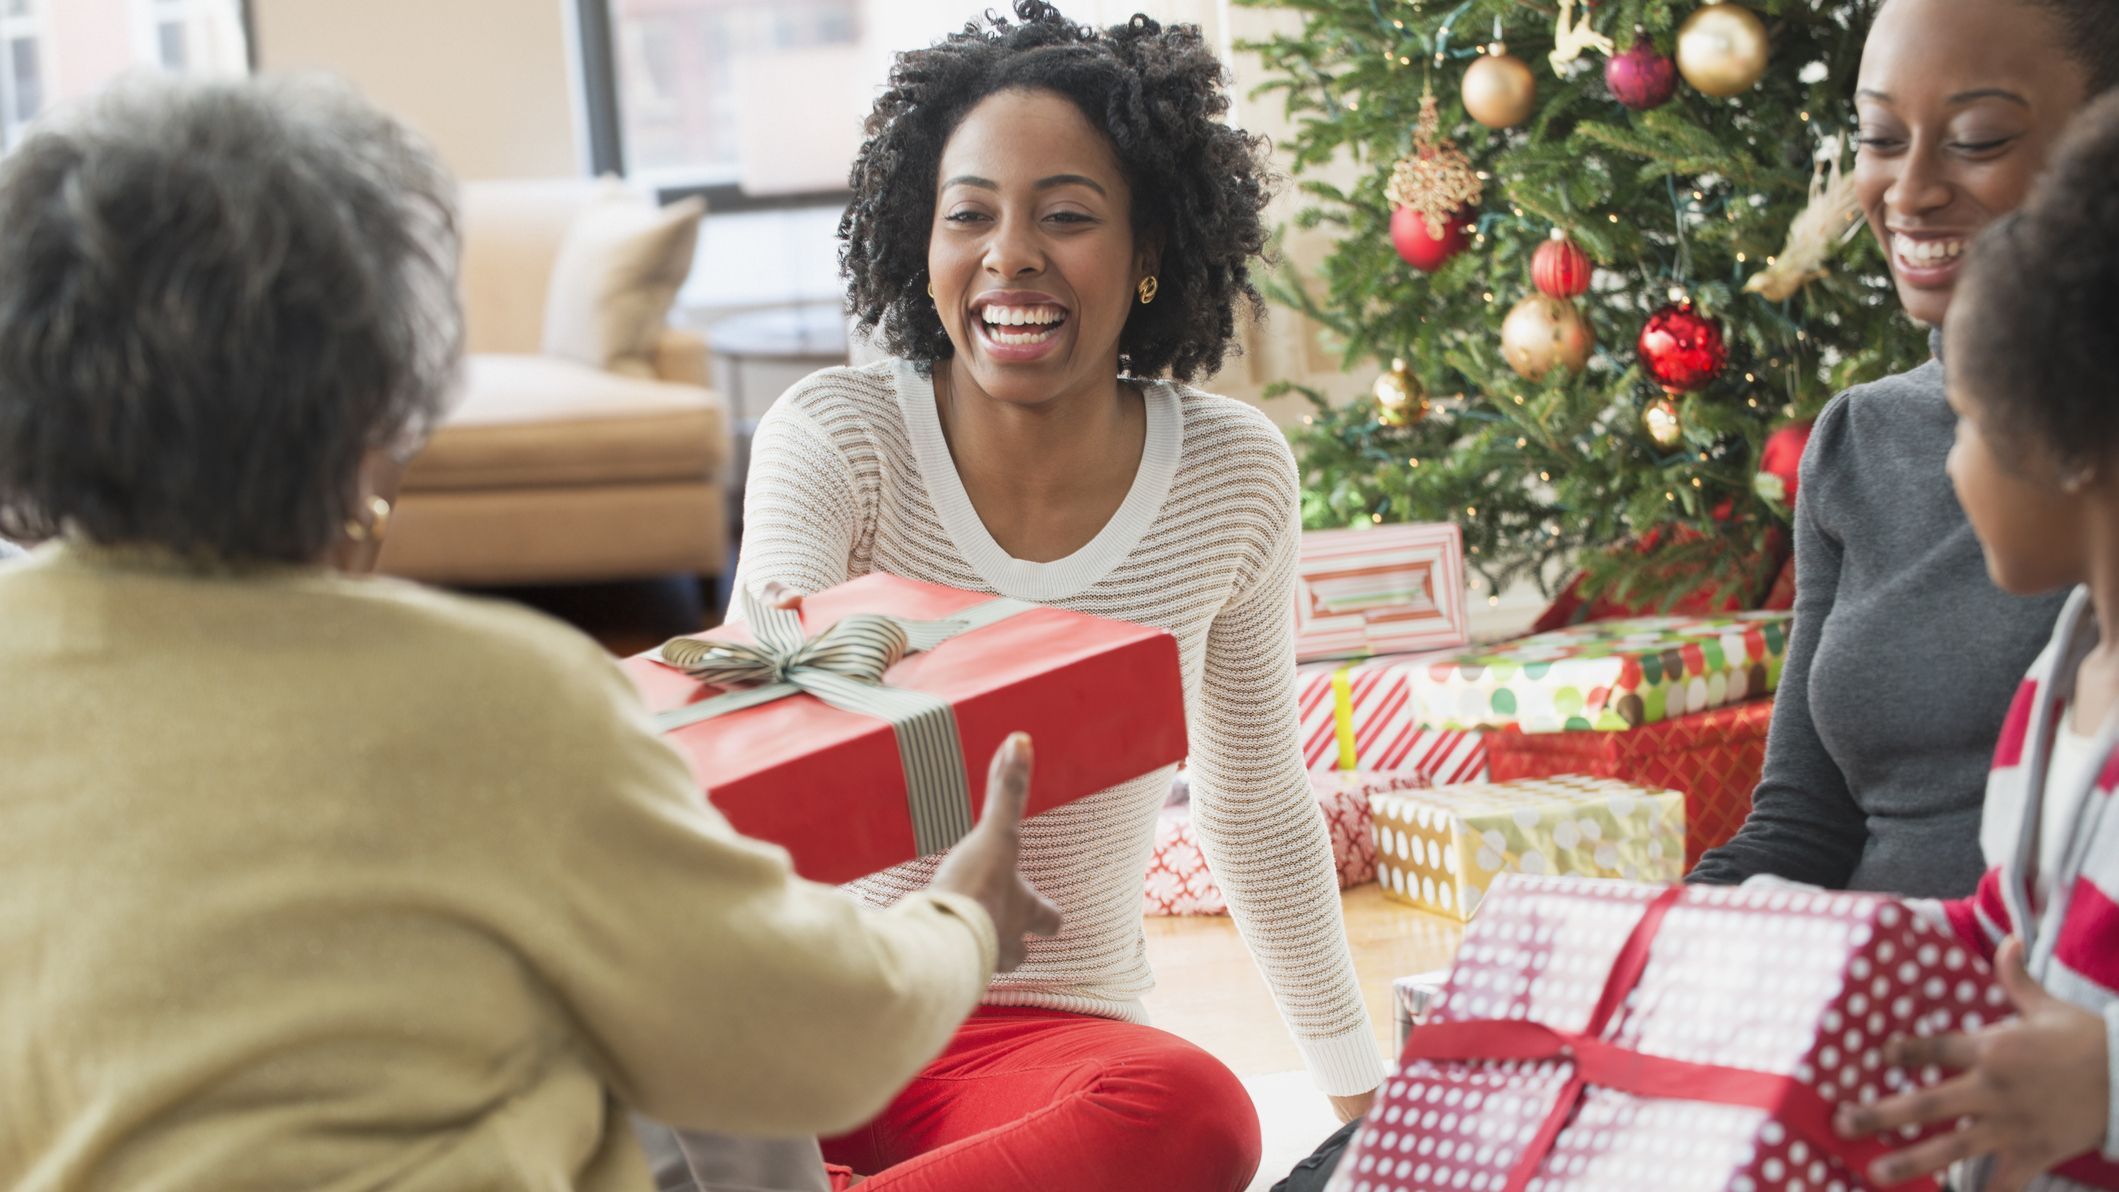 18 of the Best Gift Exchange Ideas for a Joyful Holiday Celebration